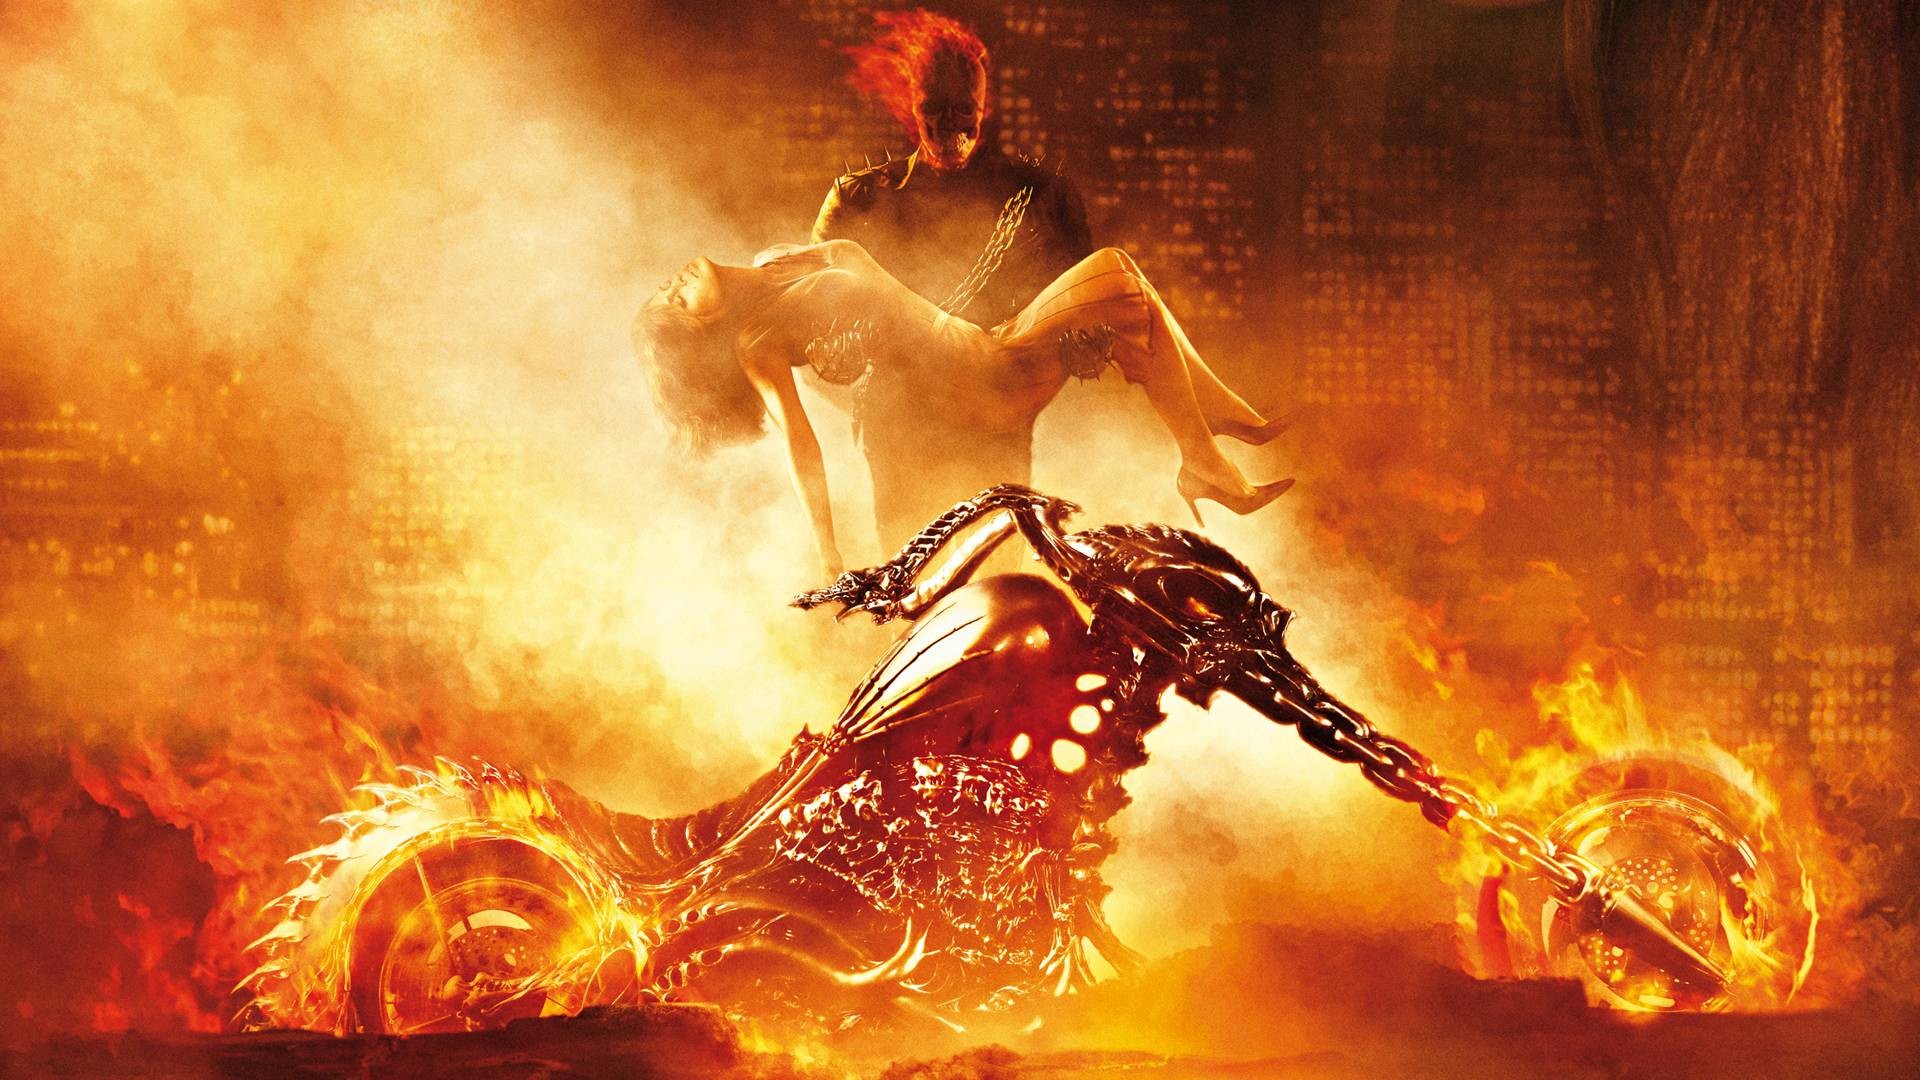 1920x1080 Download Free Ghost Rider Wallpaper  | HD Wallpapers .